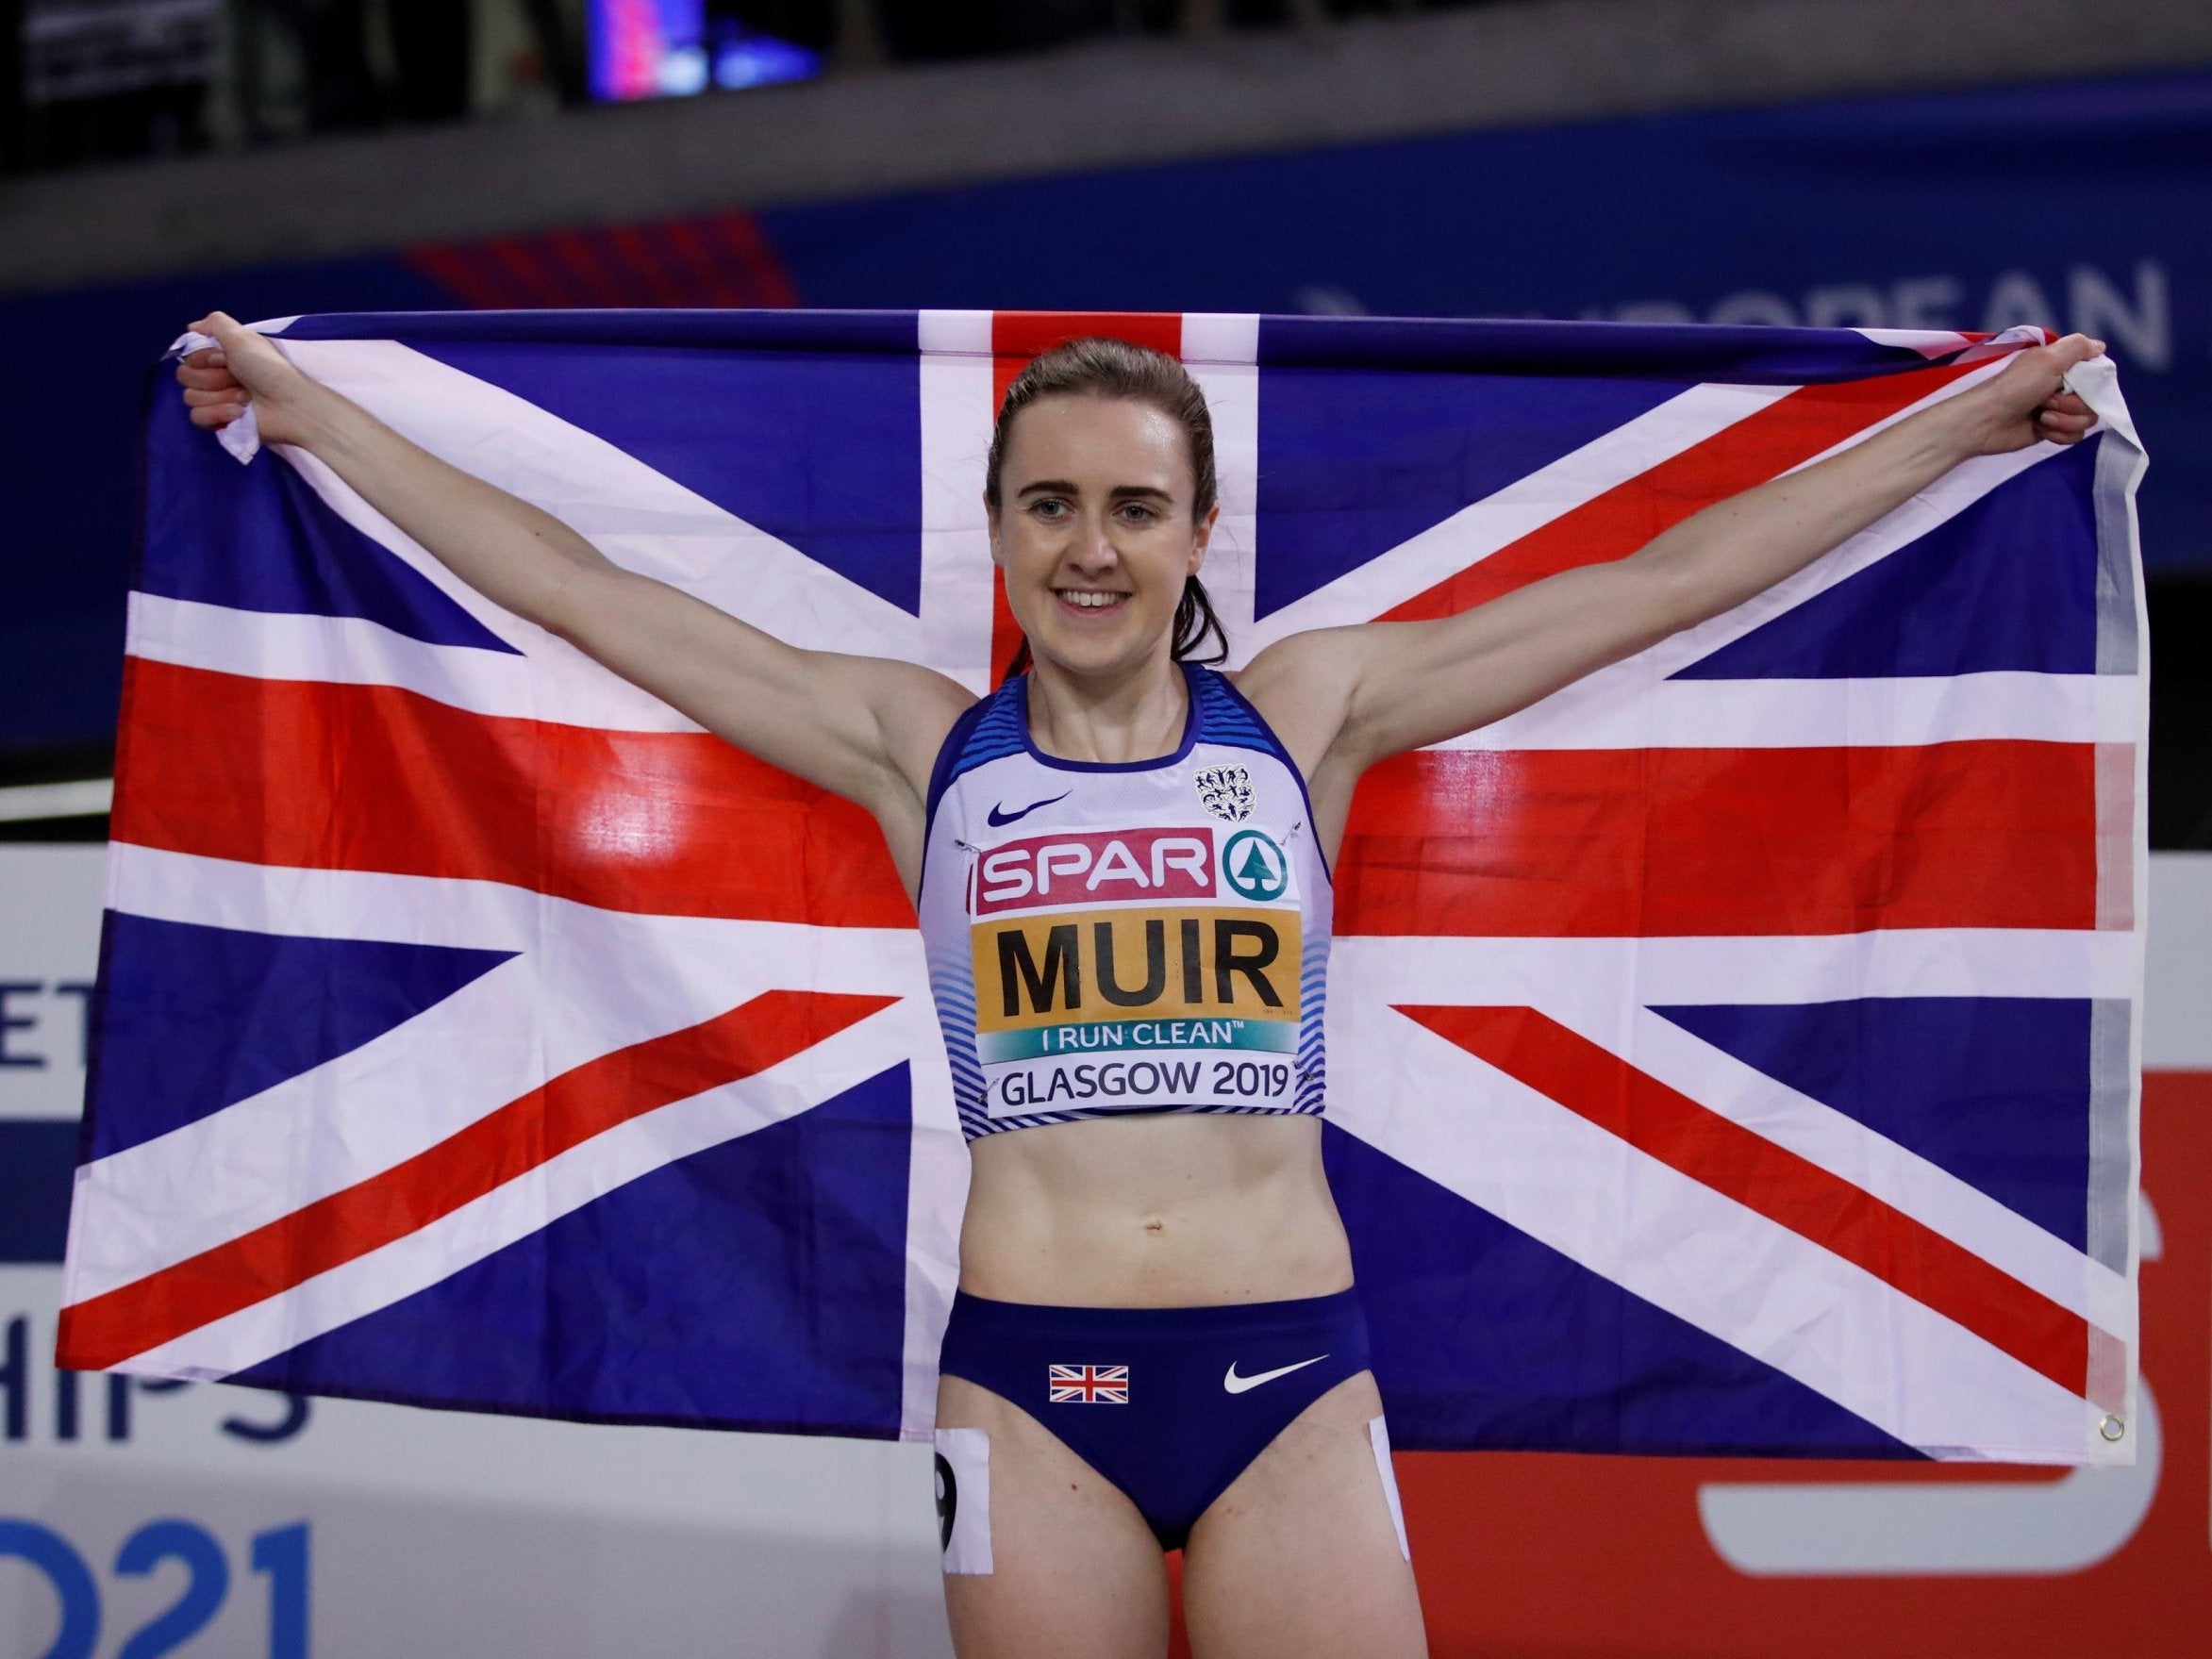 Muir defended her titles in front of a home crowd in Glasgow